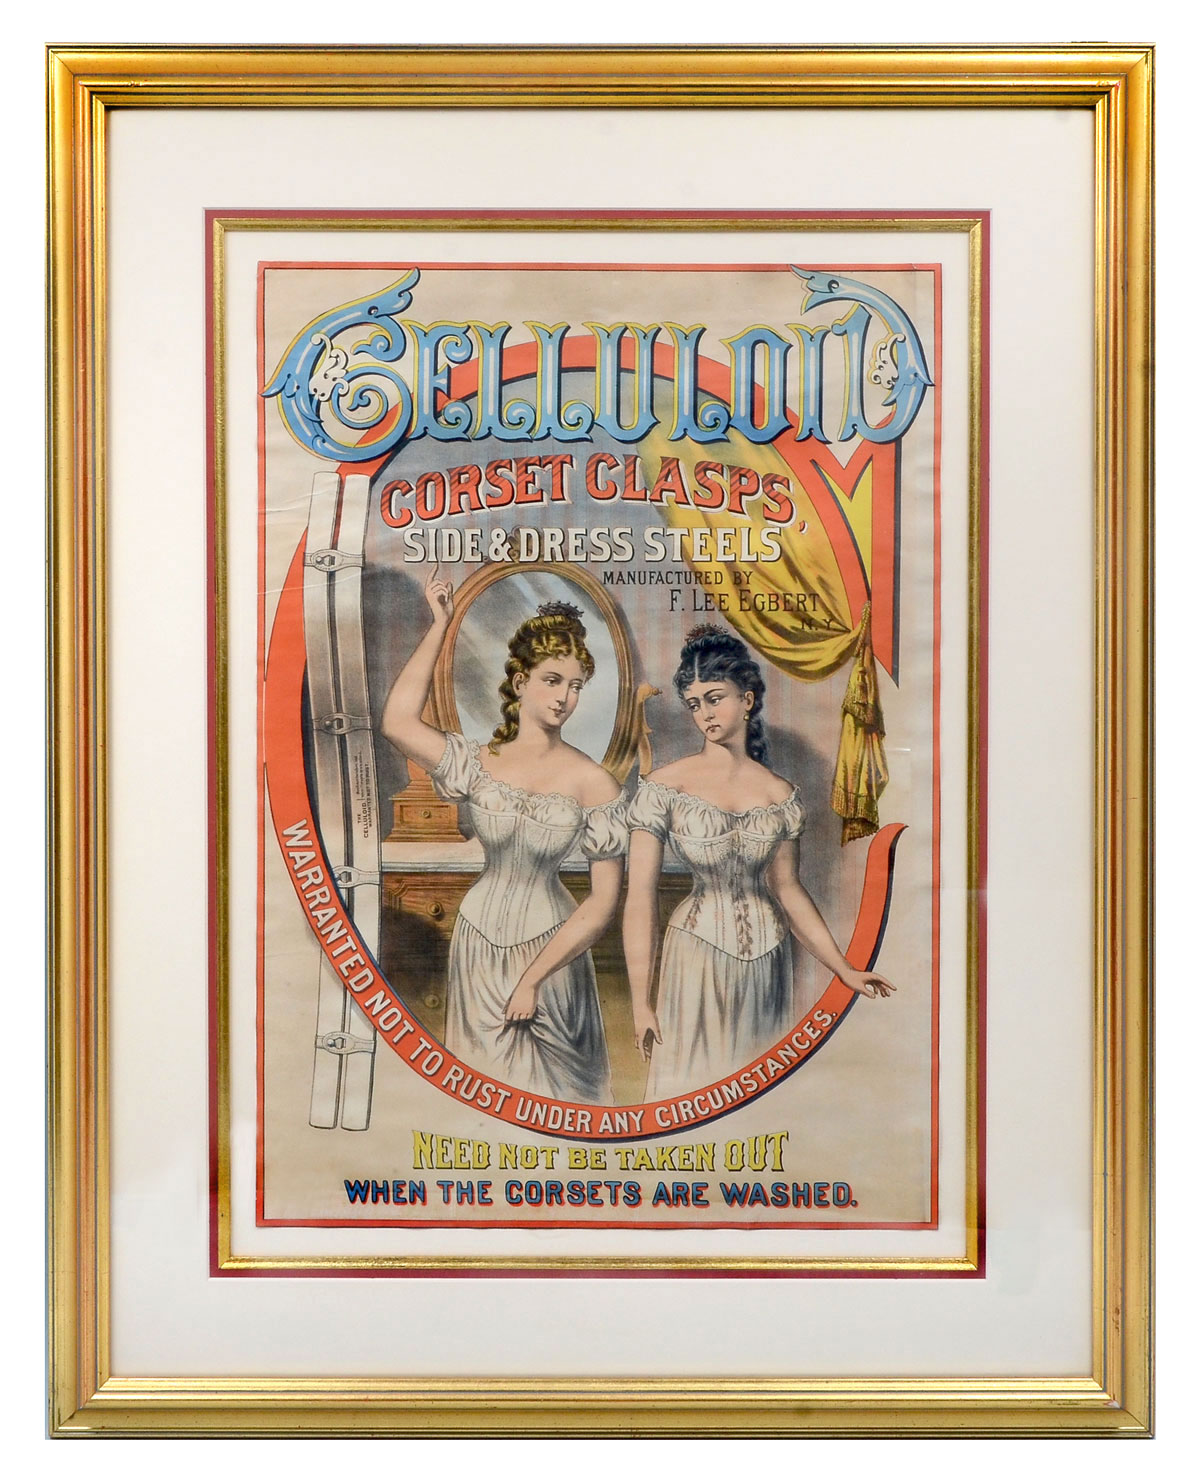 ADVERTISEMENT LITHOGRAPH FOR CELLULOID 36f29b